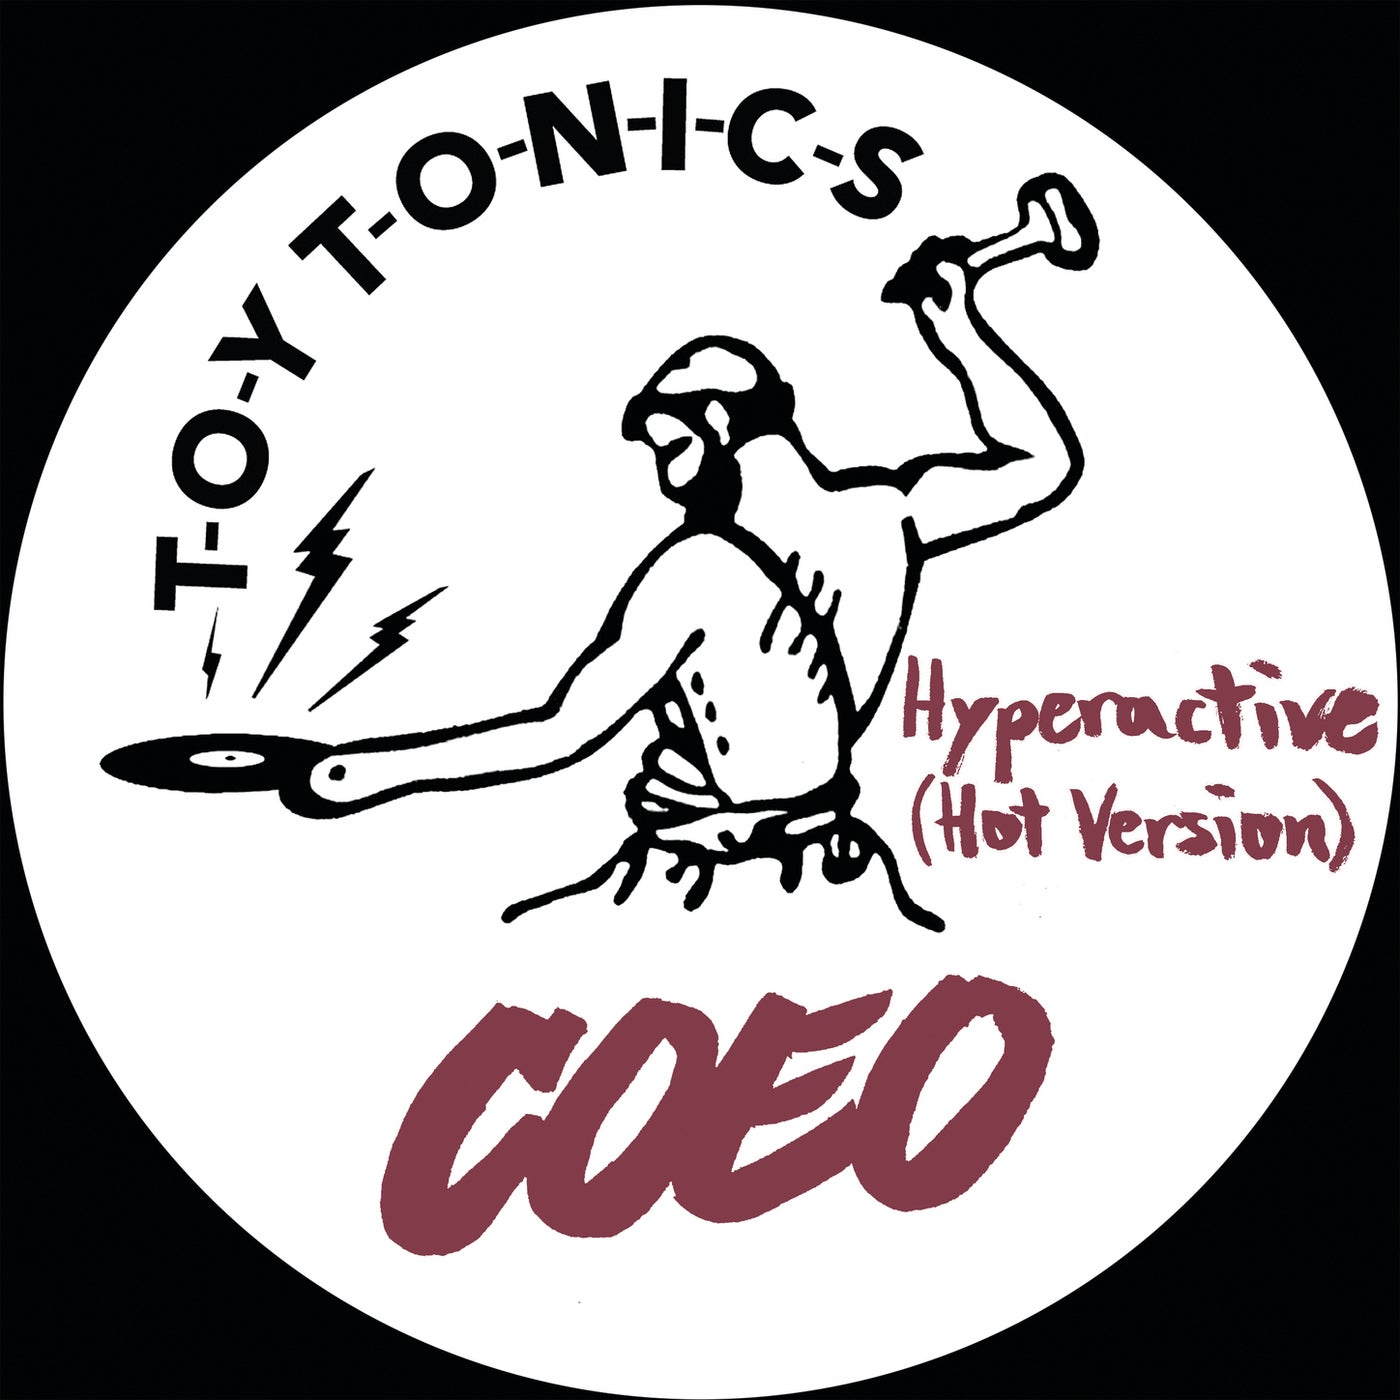 image cover: Coeo - Hyperactive (Hot Version) / TOYT114S4